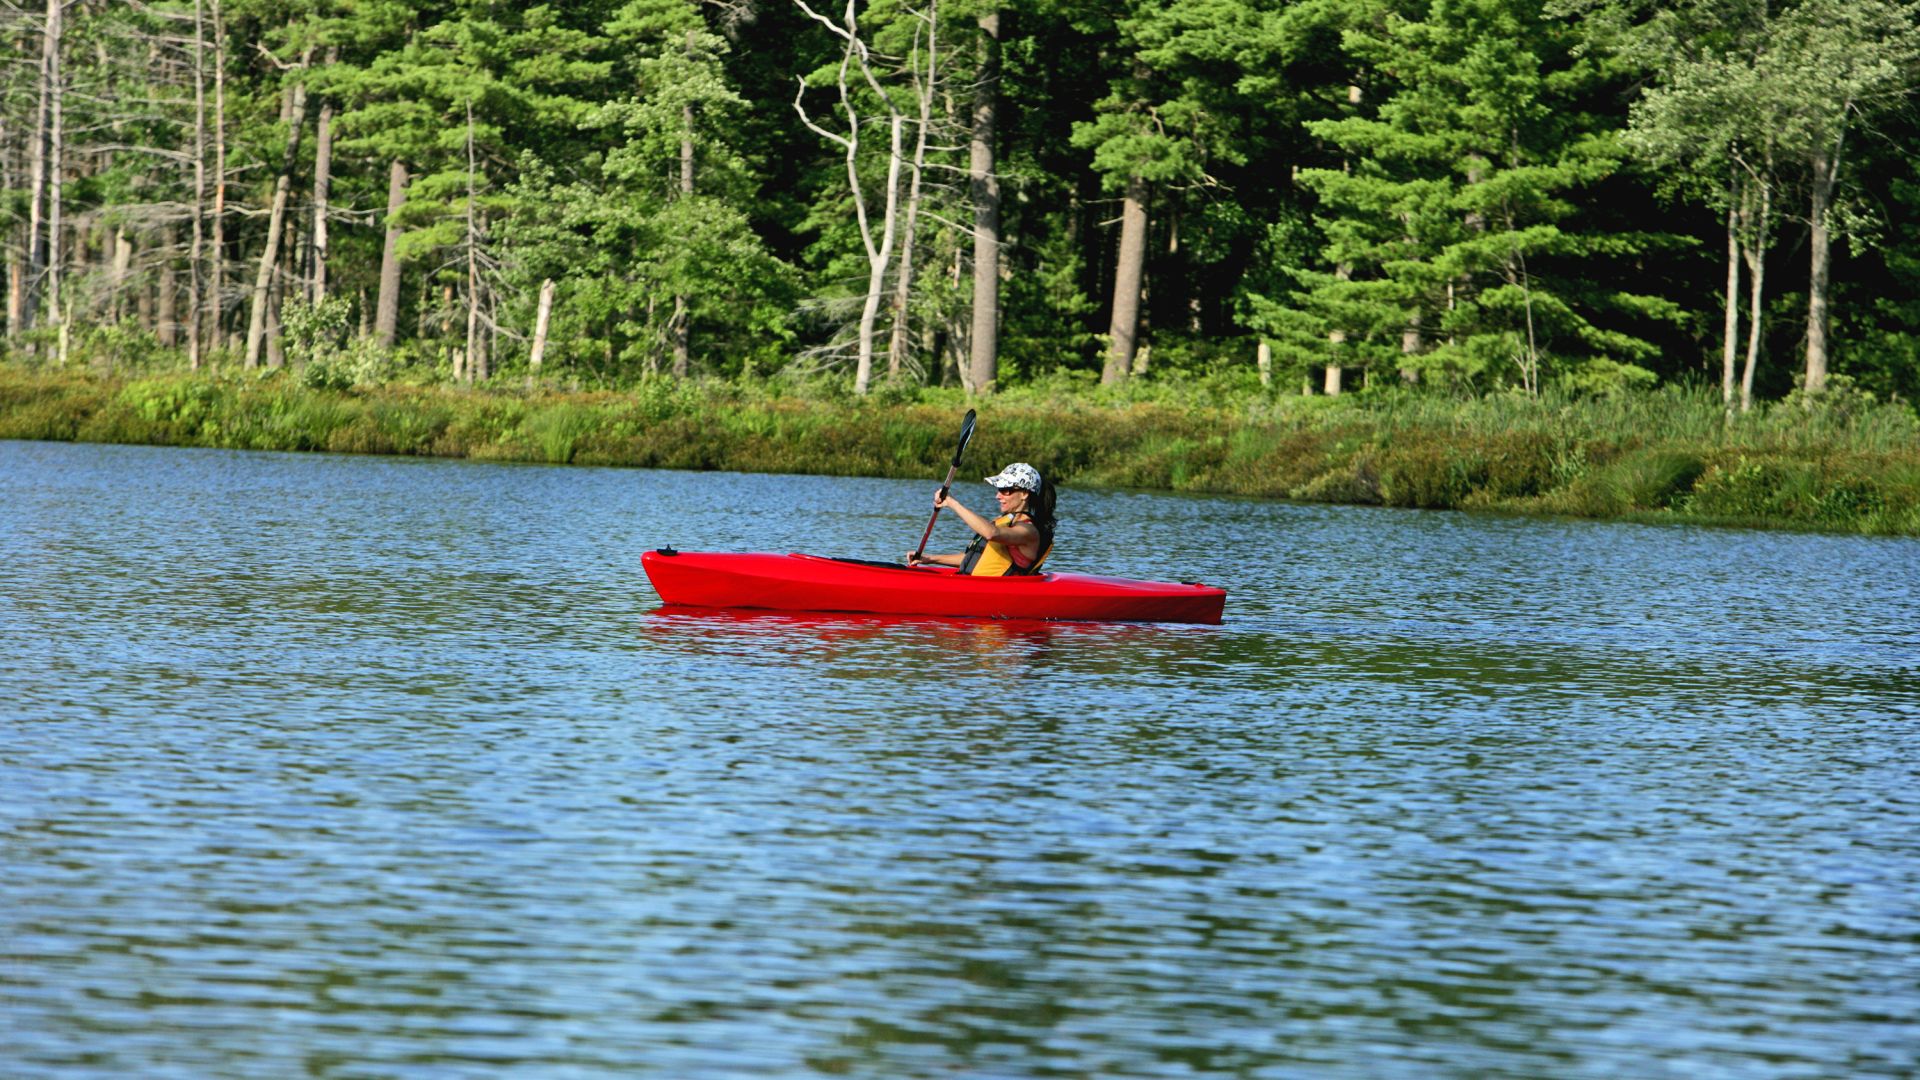 Solo woman kayaking on the lake in summer at The Lodge at Woodloch